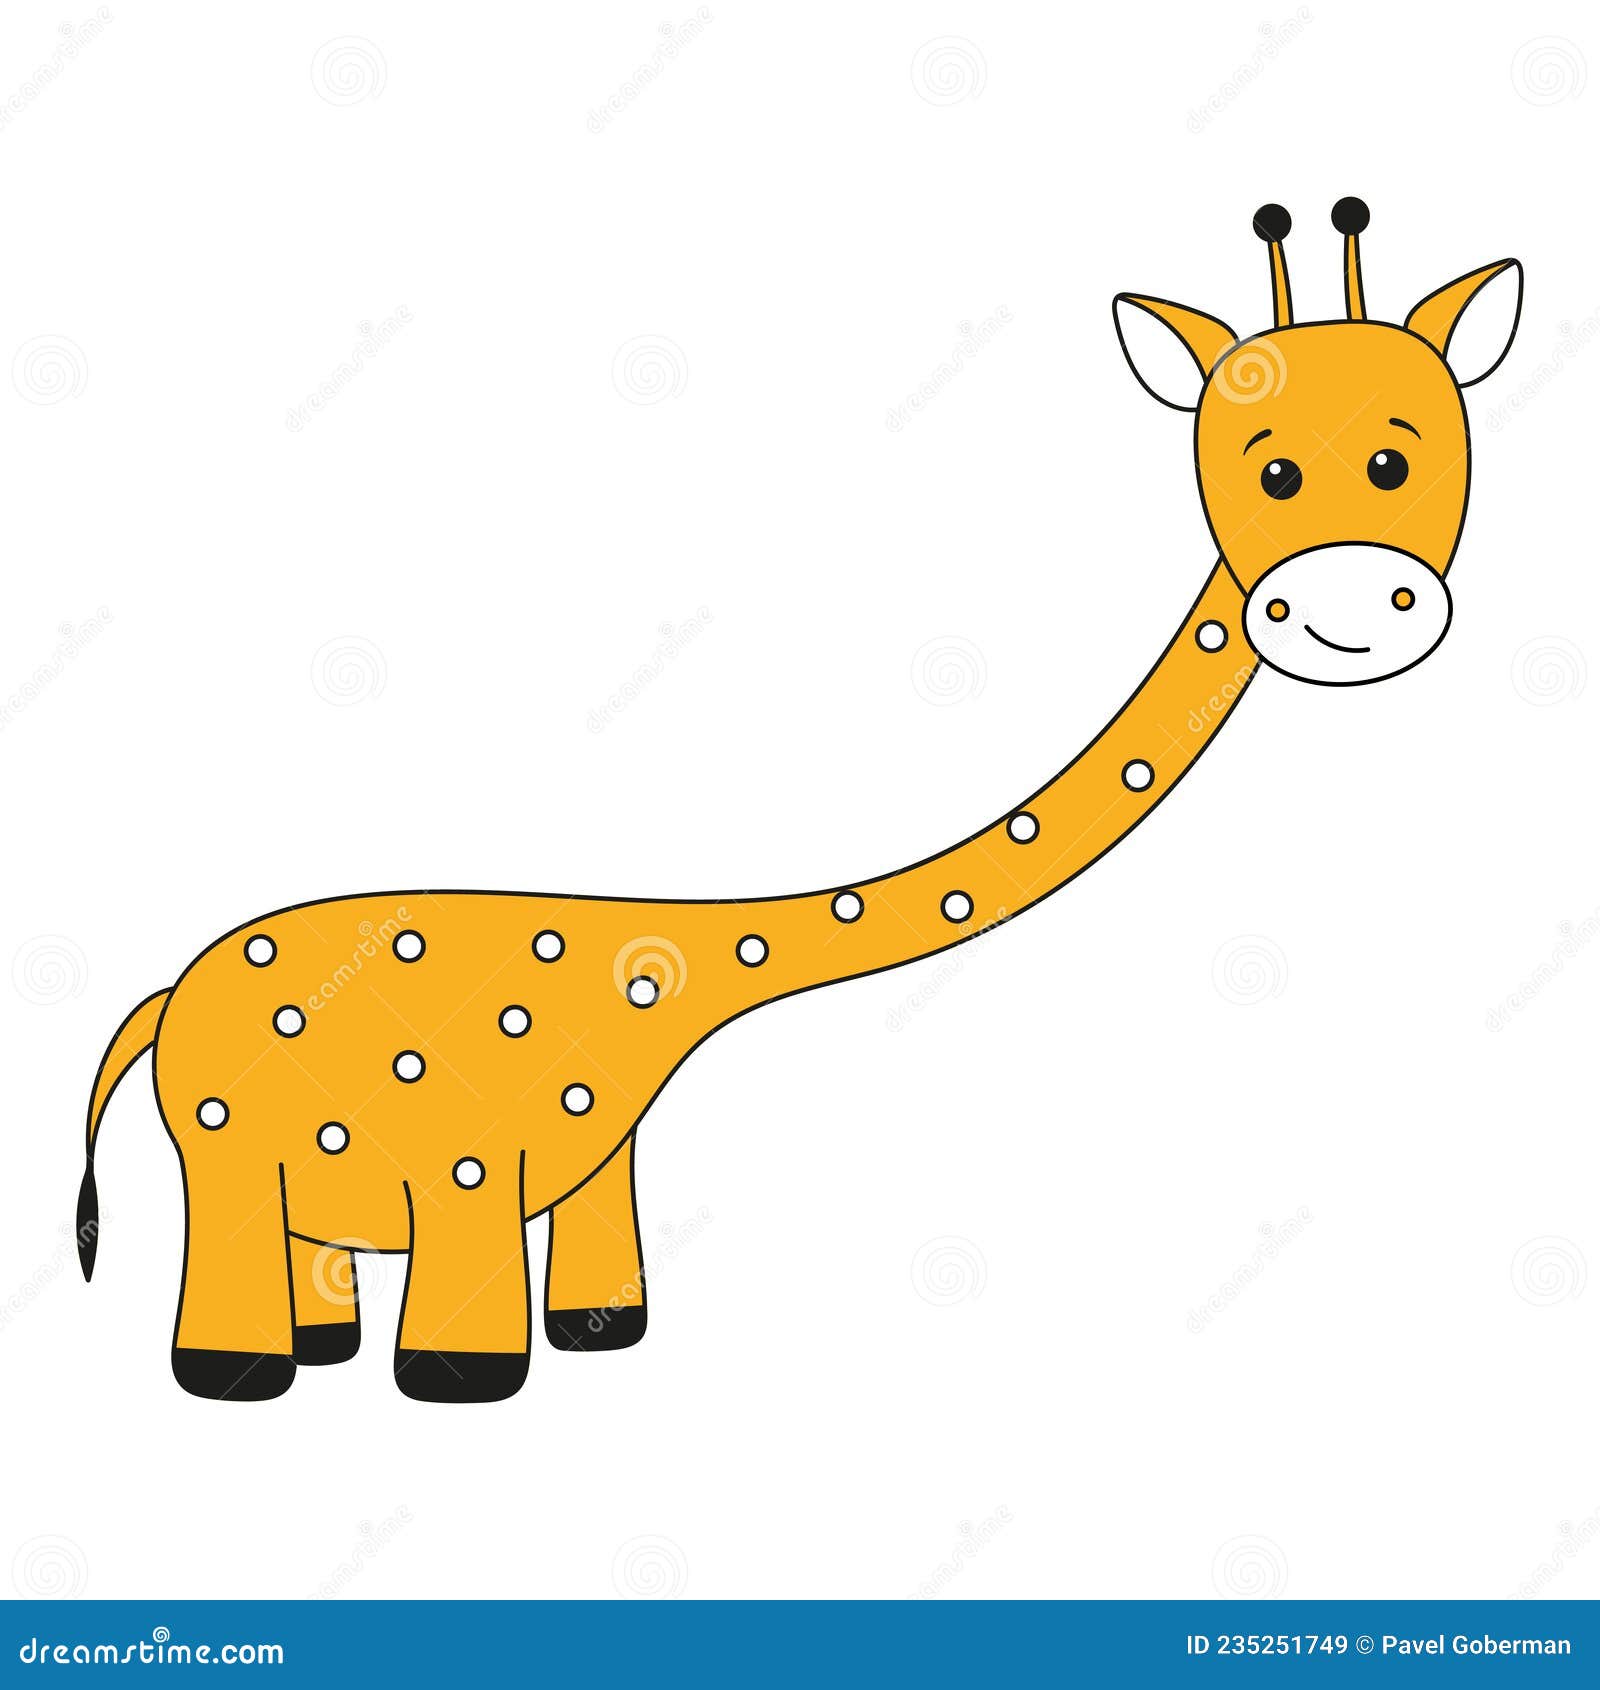 How to Draw a Giraffe Face for Kids (Animal Faces for Kids) Step by Step |  DrawingTutorials101.com